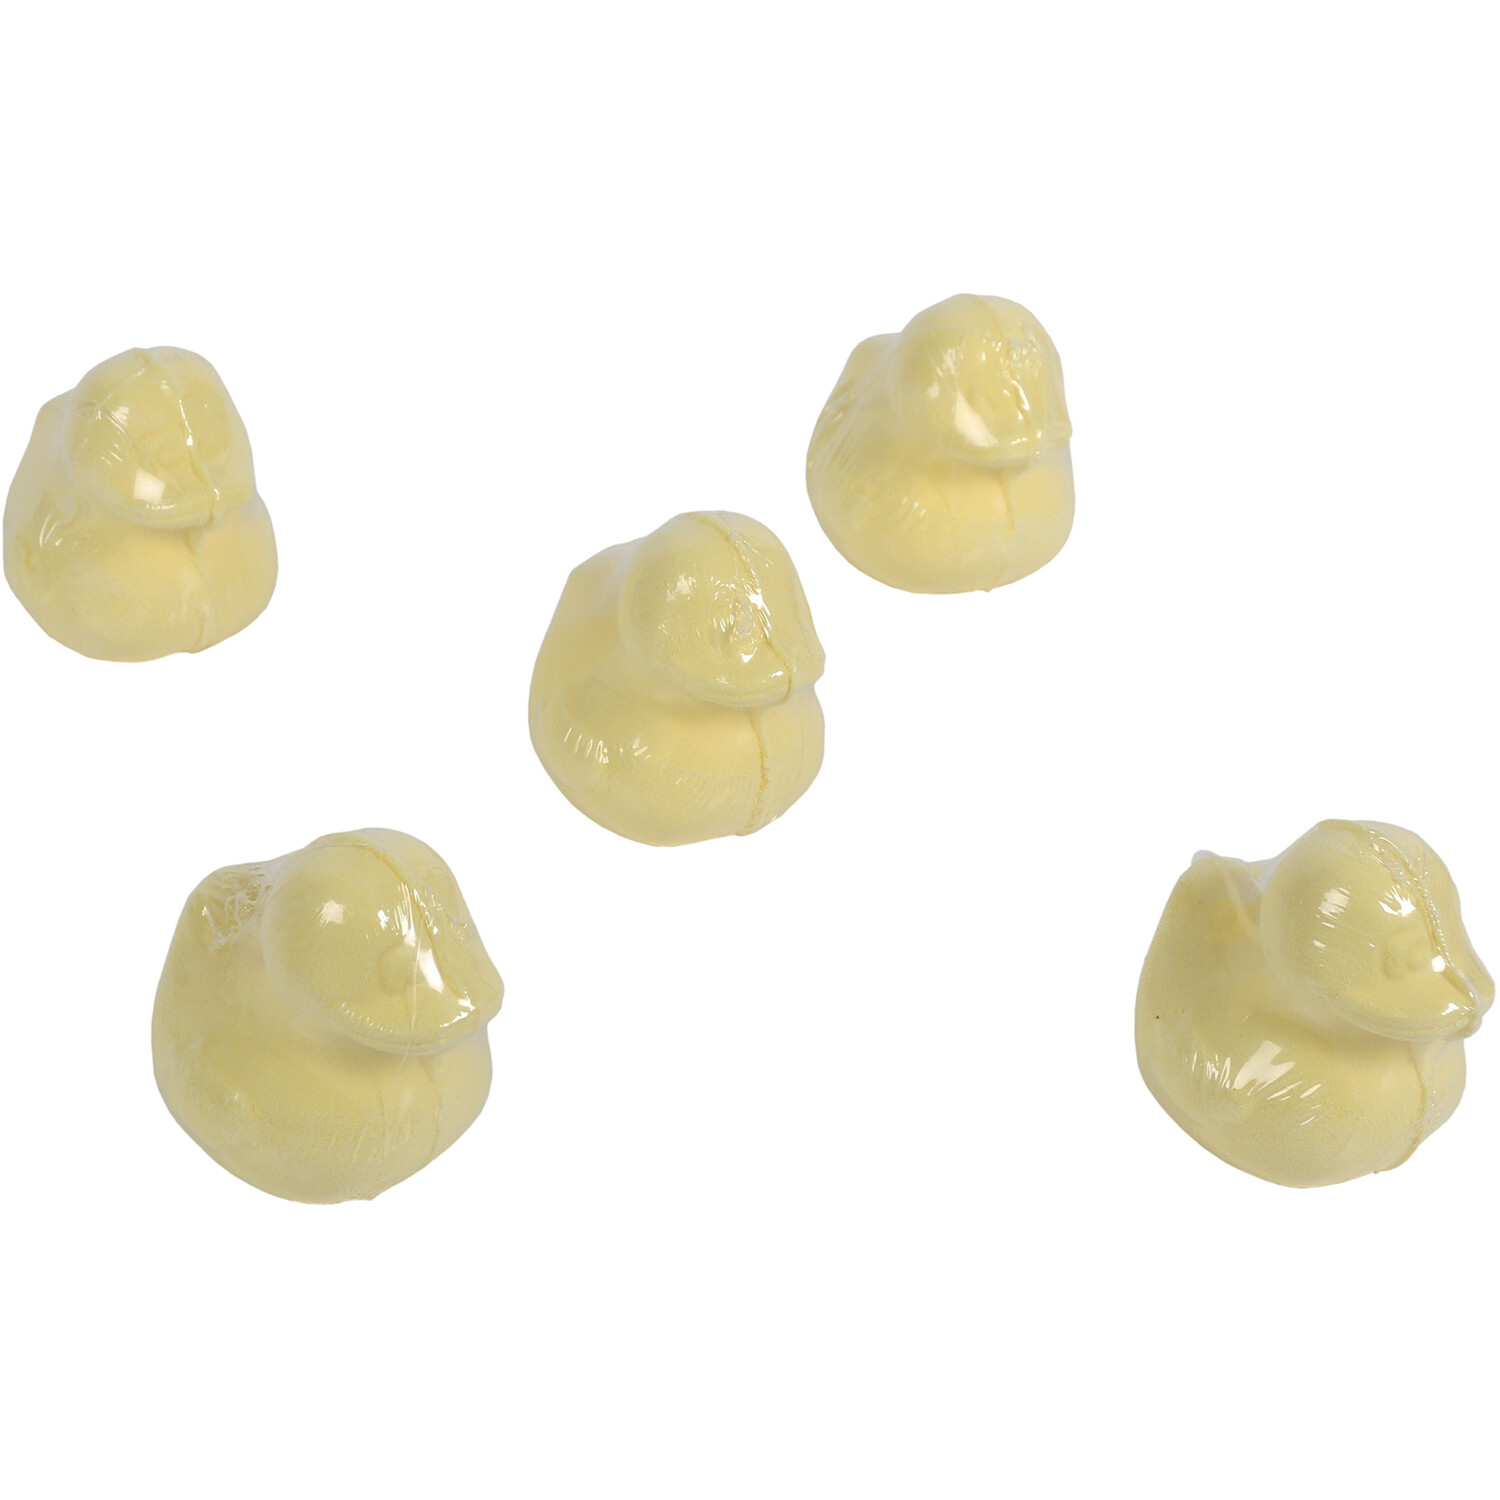 Pack of 5 Marshmallow Fluff Scented Bath Fizzers - Yellow Image 2